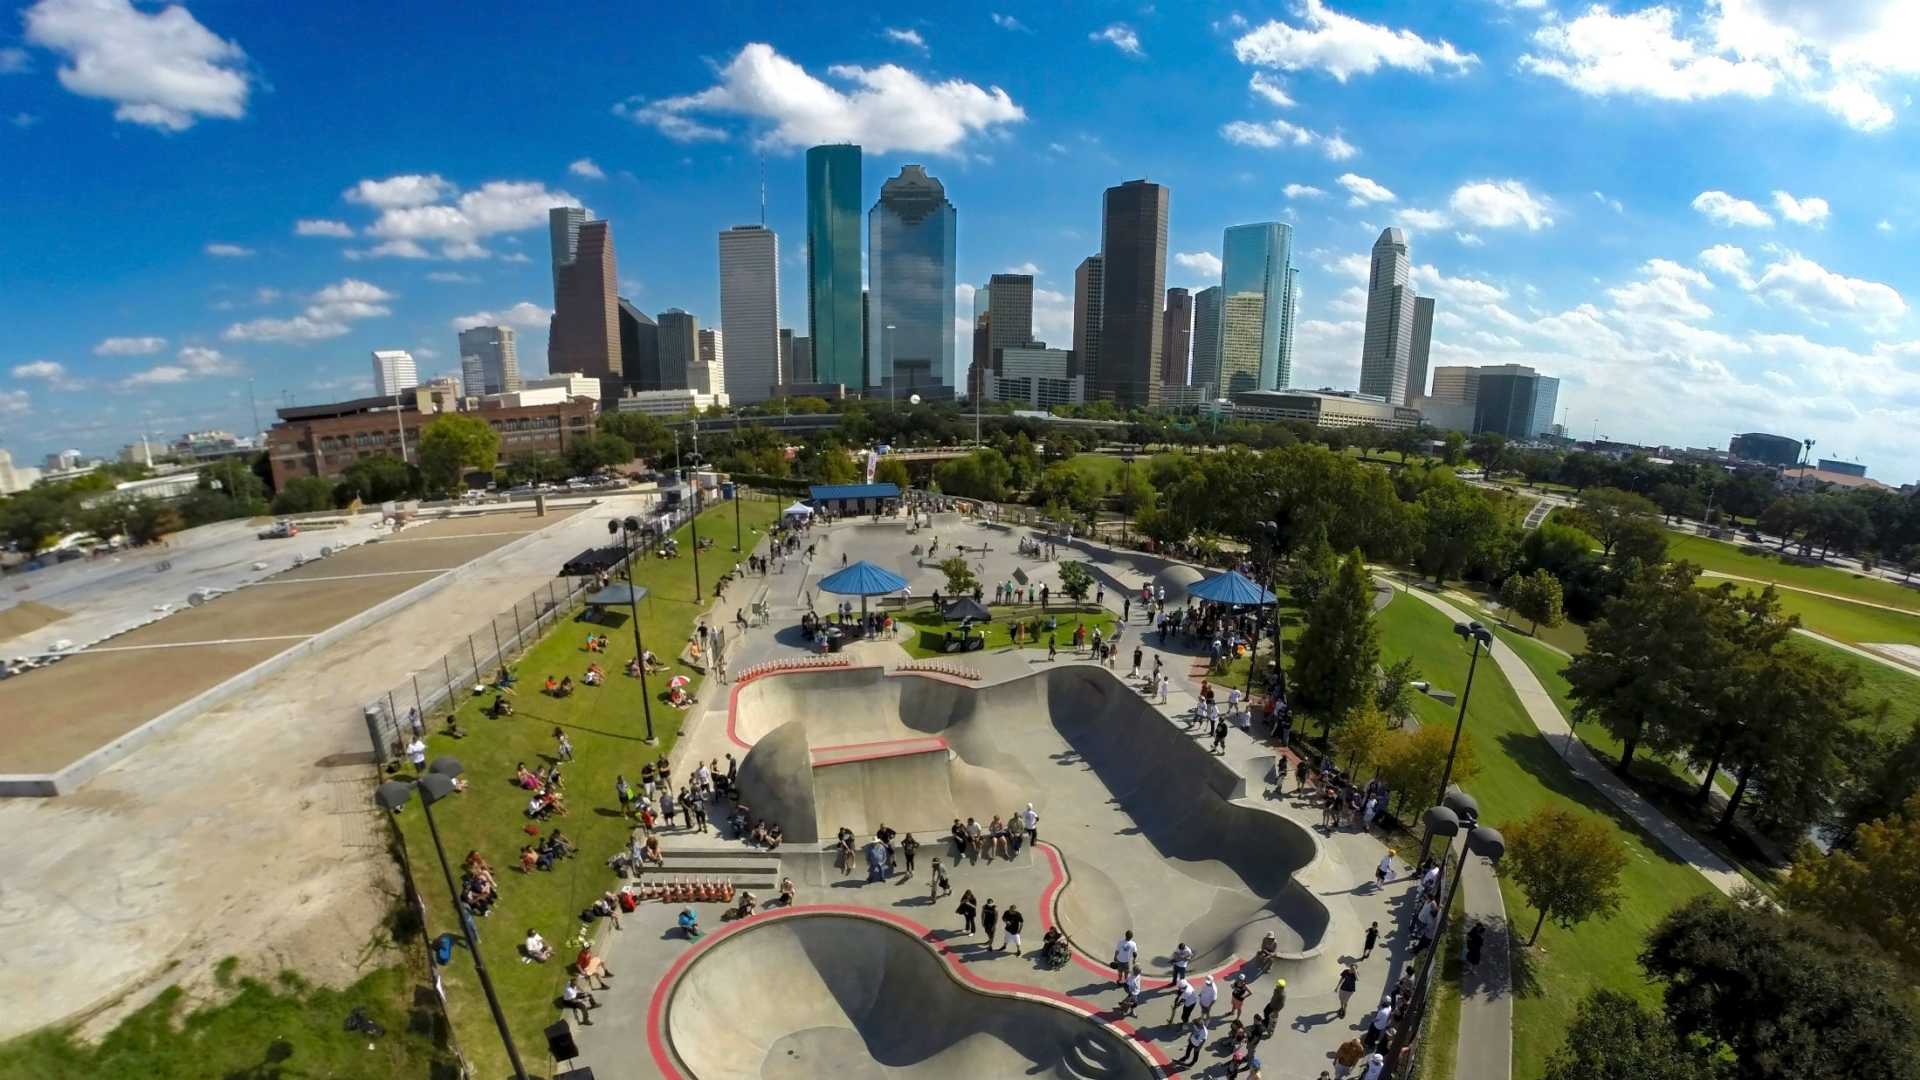 Free Events in Houston Art, Music & Exhibitions